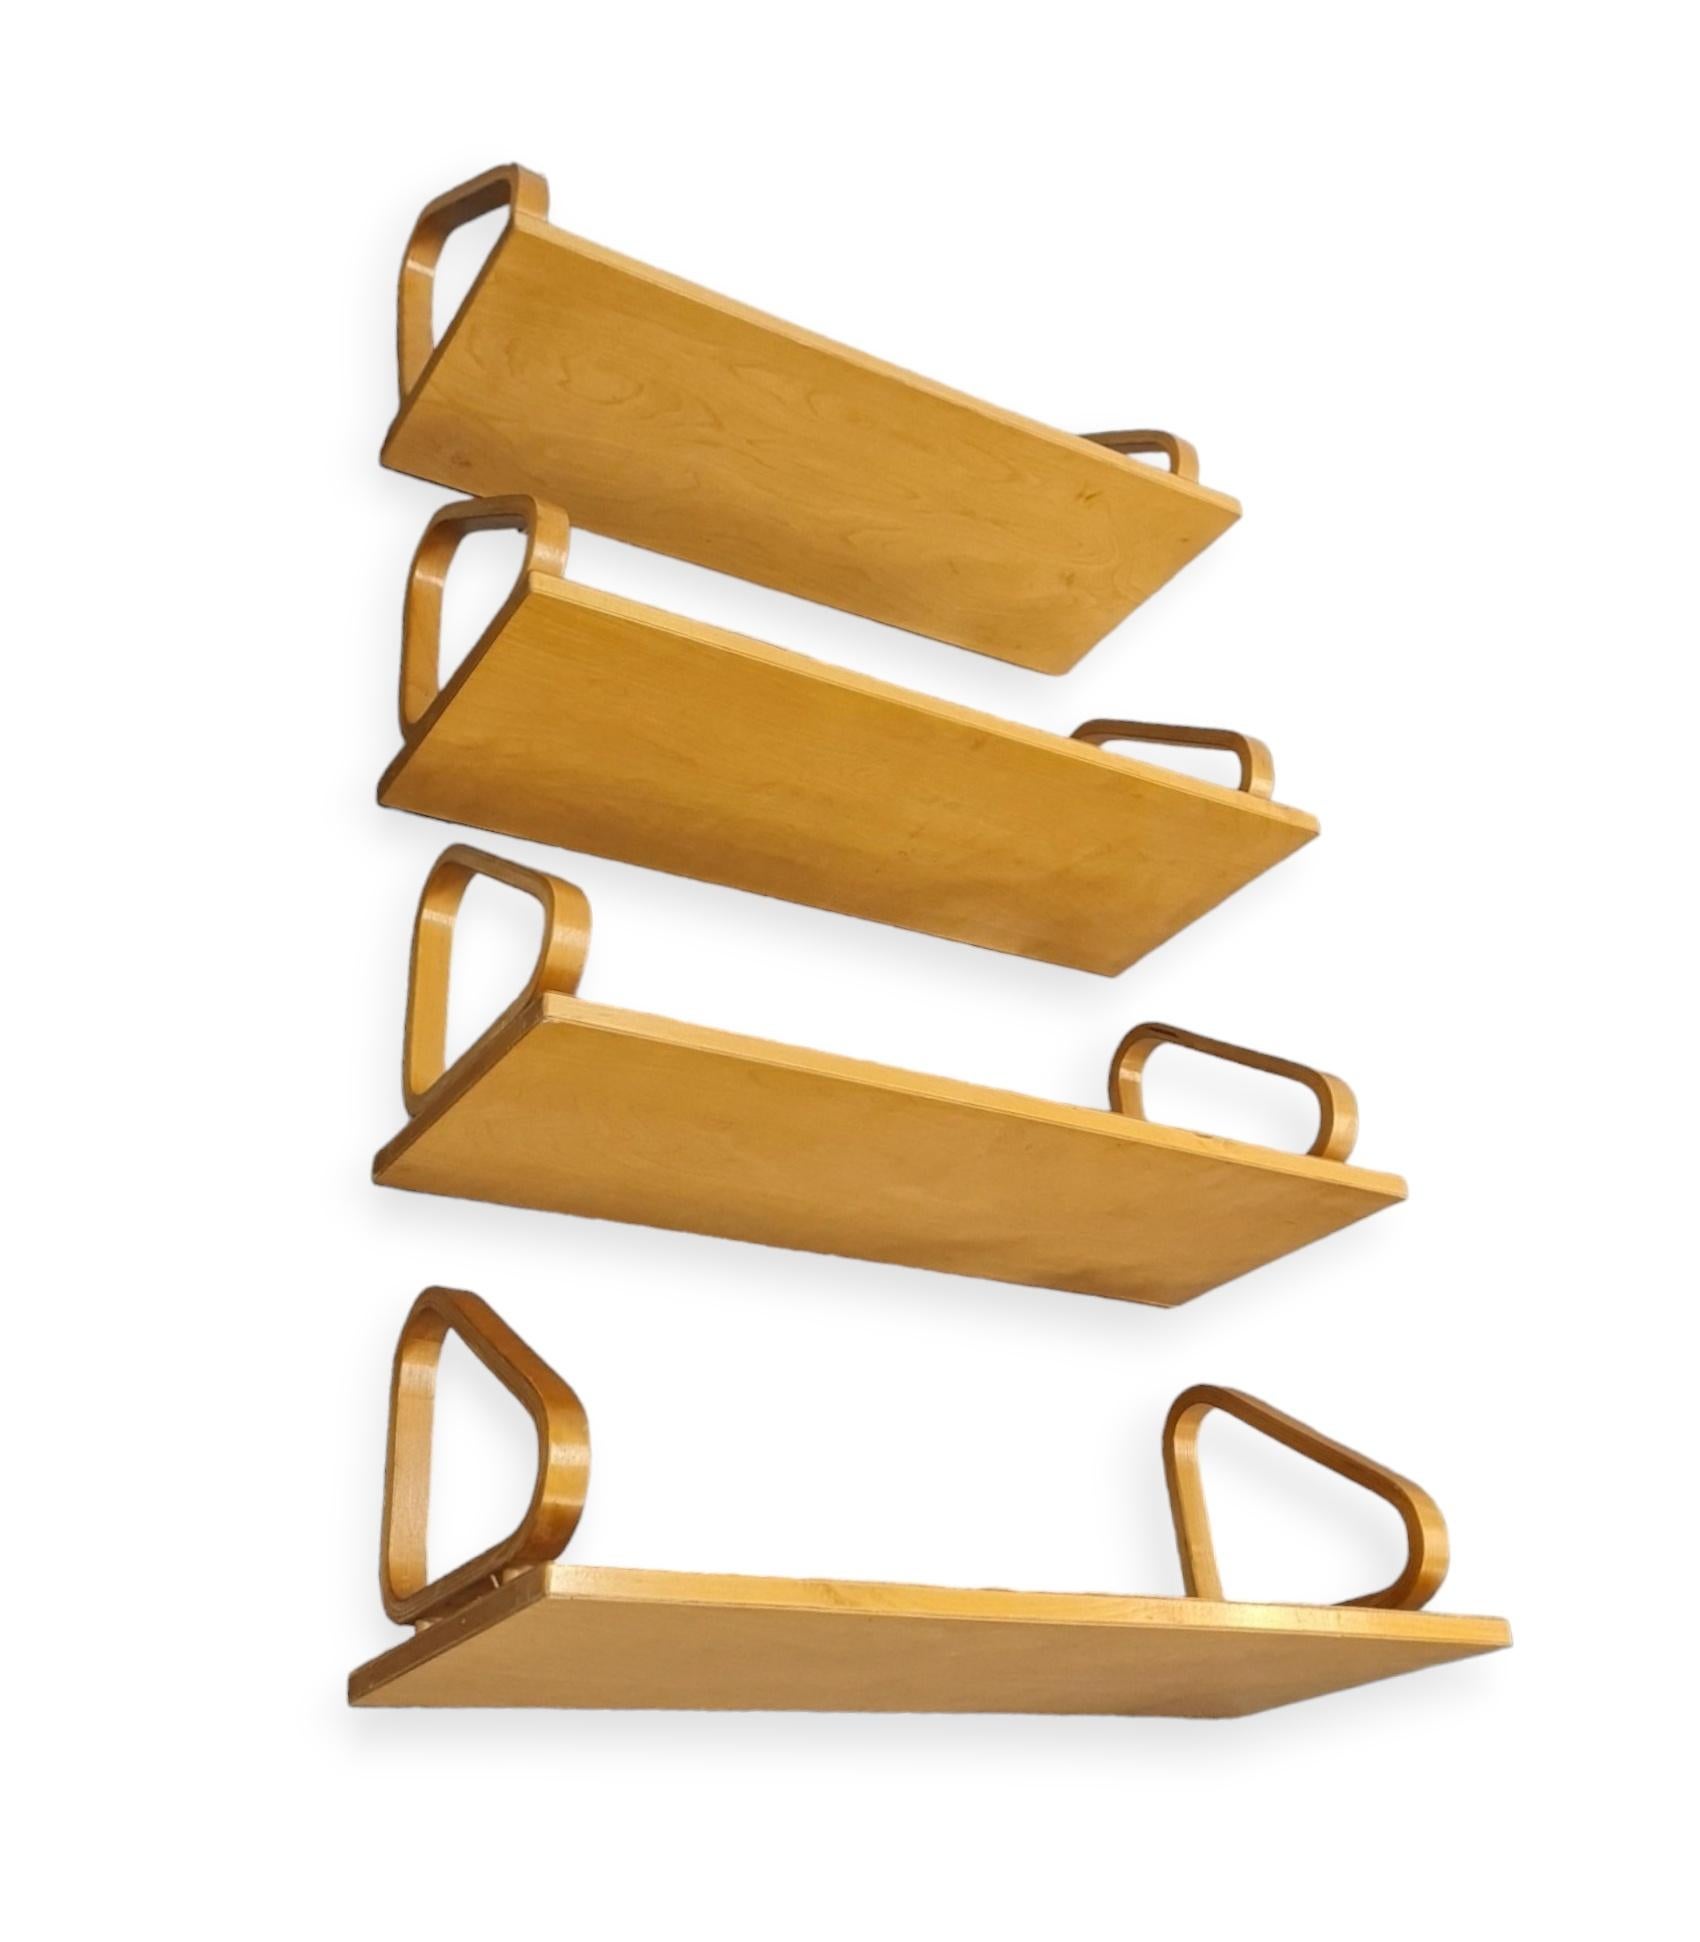 A beautiful set of 4 Alvar Aalto wall shelves model 112. These shelves with the pegs are much rarer than the normal ones, not to mention a set of four with the same patina and original condition. 

These minimalistic shelves have a genious light